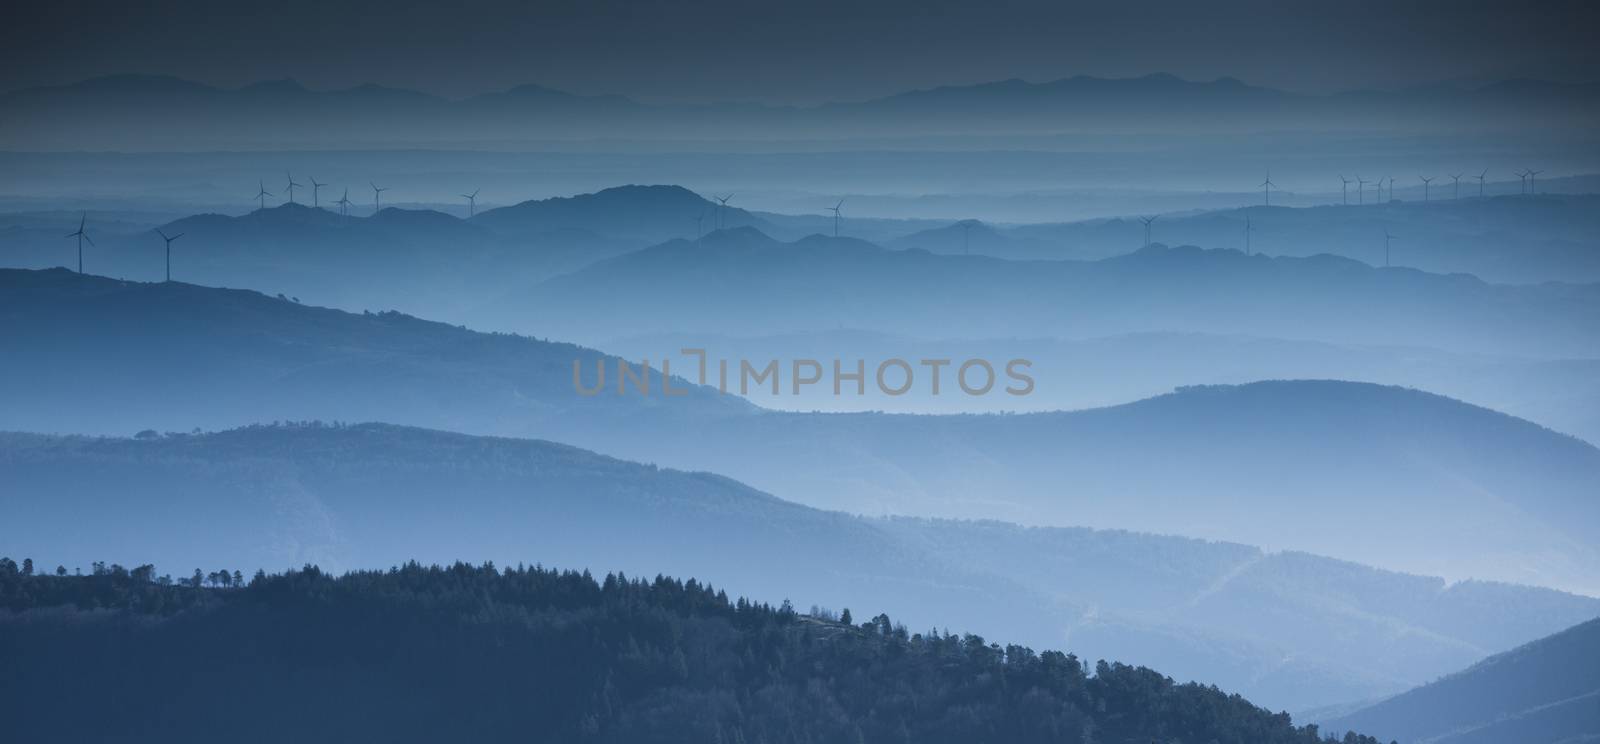 Blue montains by Iko